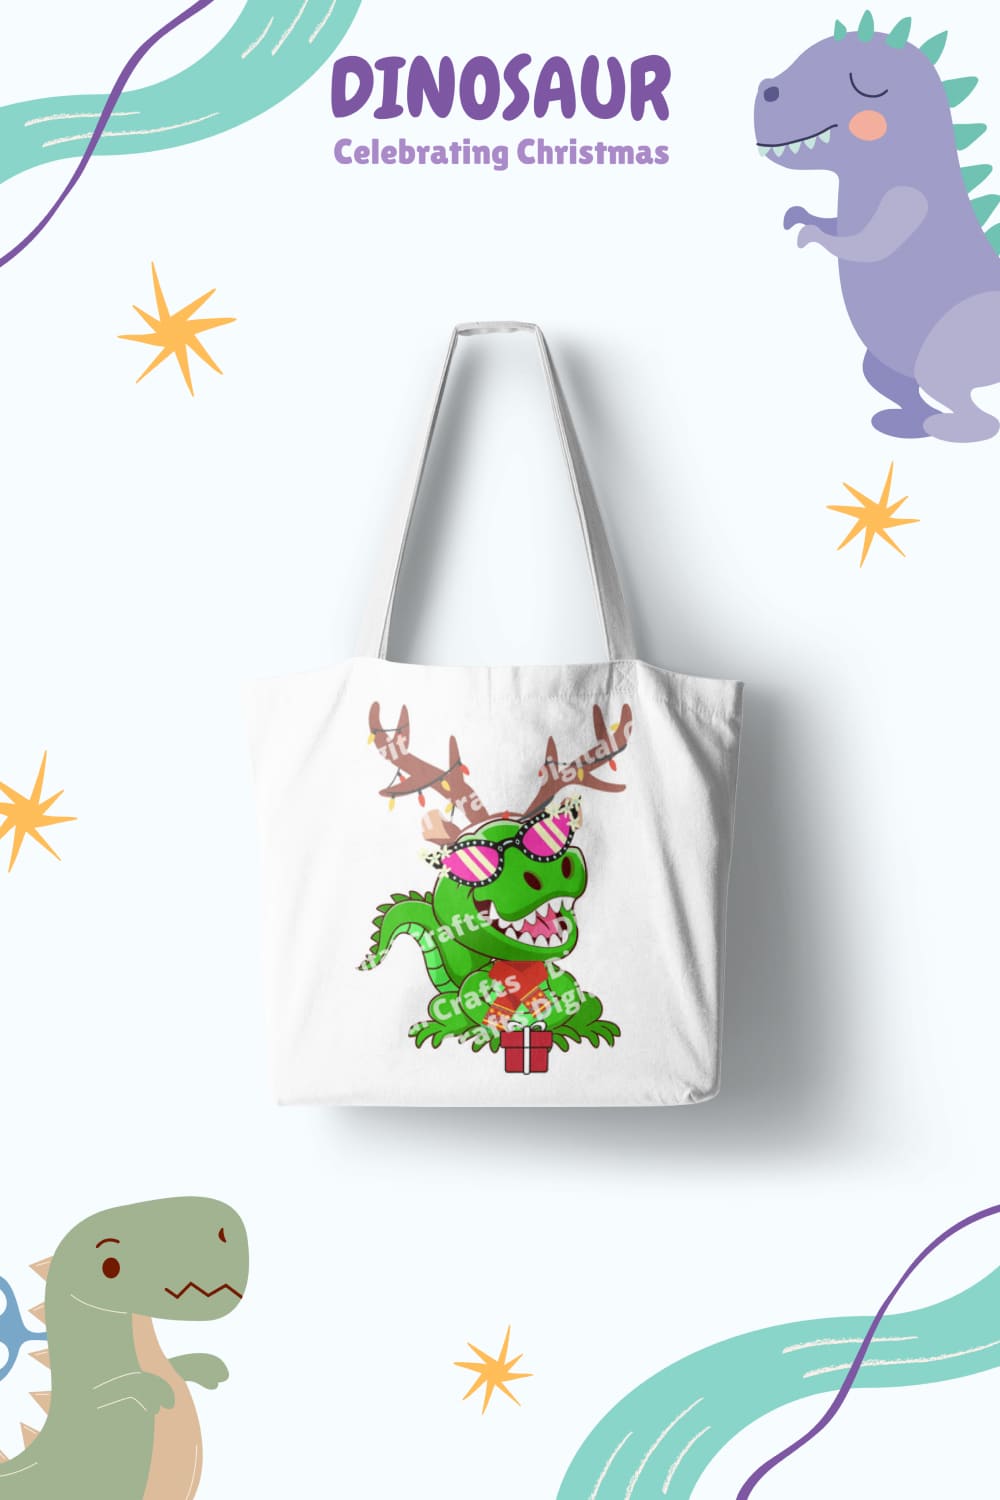 Image of a white bag with an adorable print of a dinosaur with glasses and deer antlers.